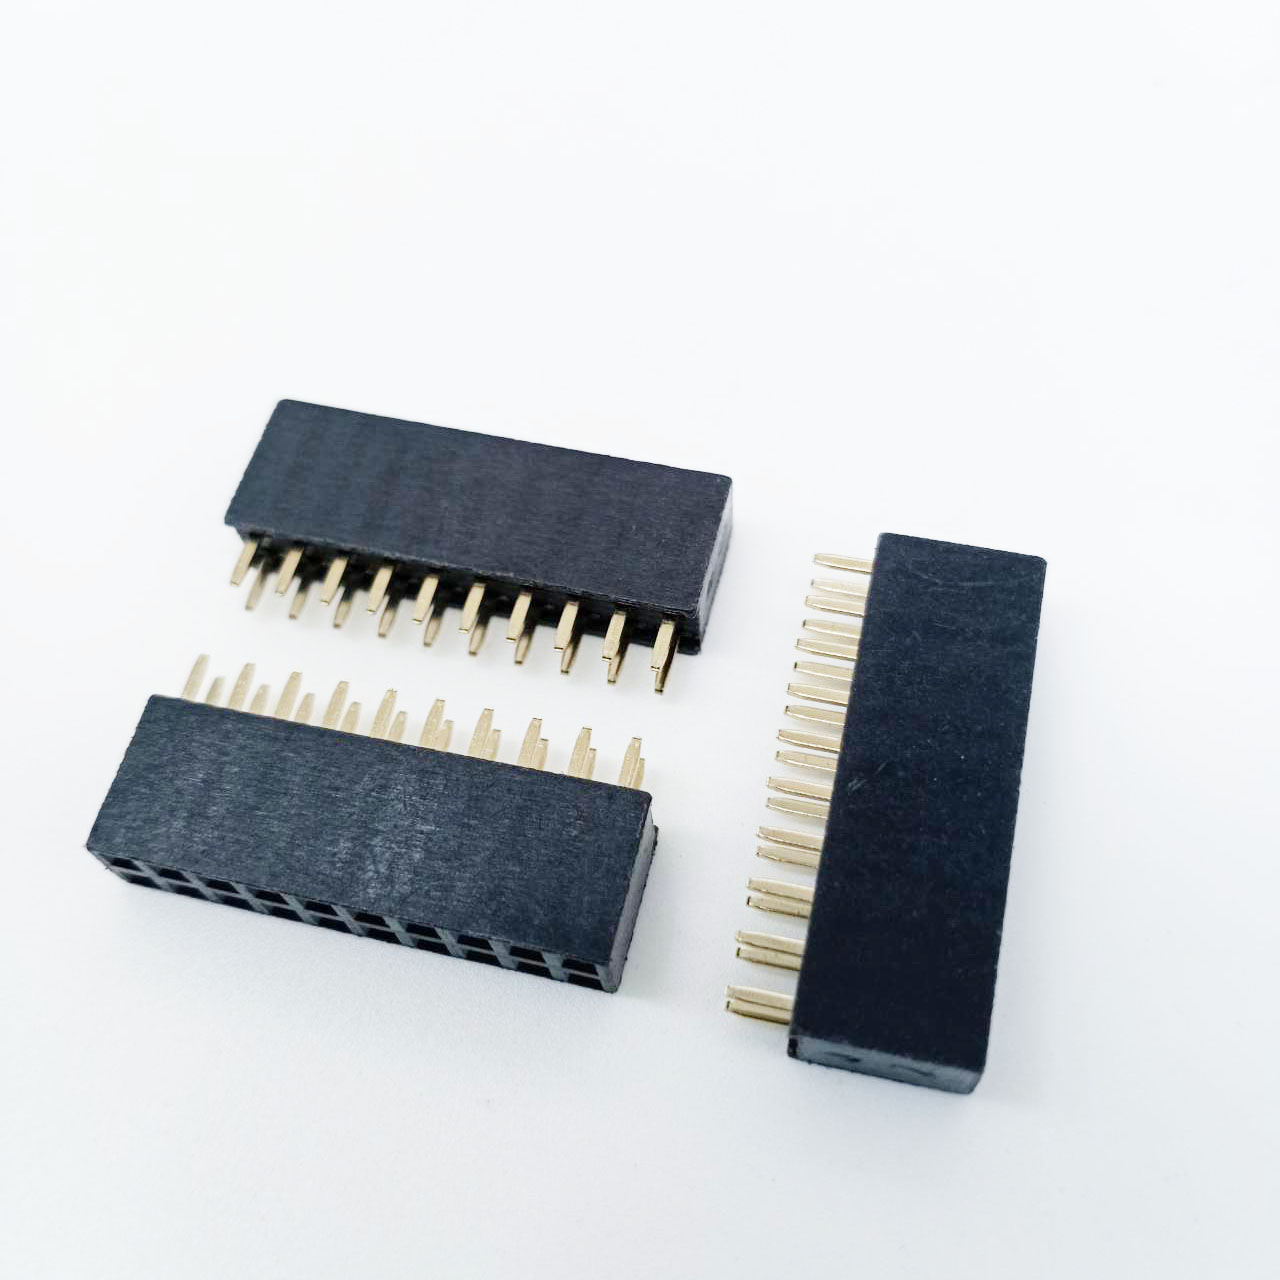 SSW SSW-110-01-G-D CONN RCPT 20POS 0.1 GOLD PCB 2.54mm female header board to board connector